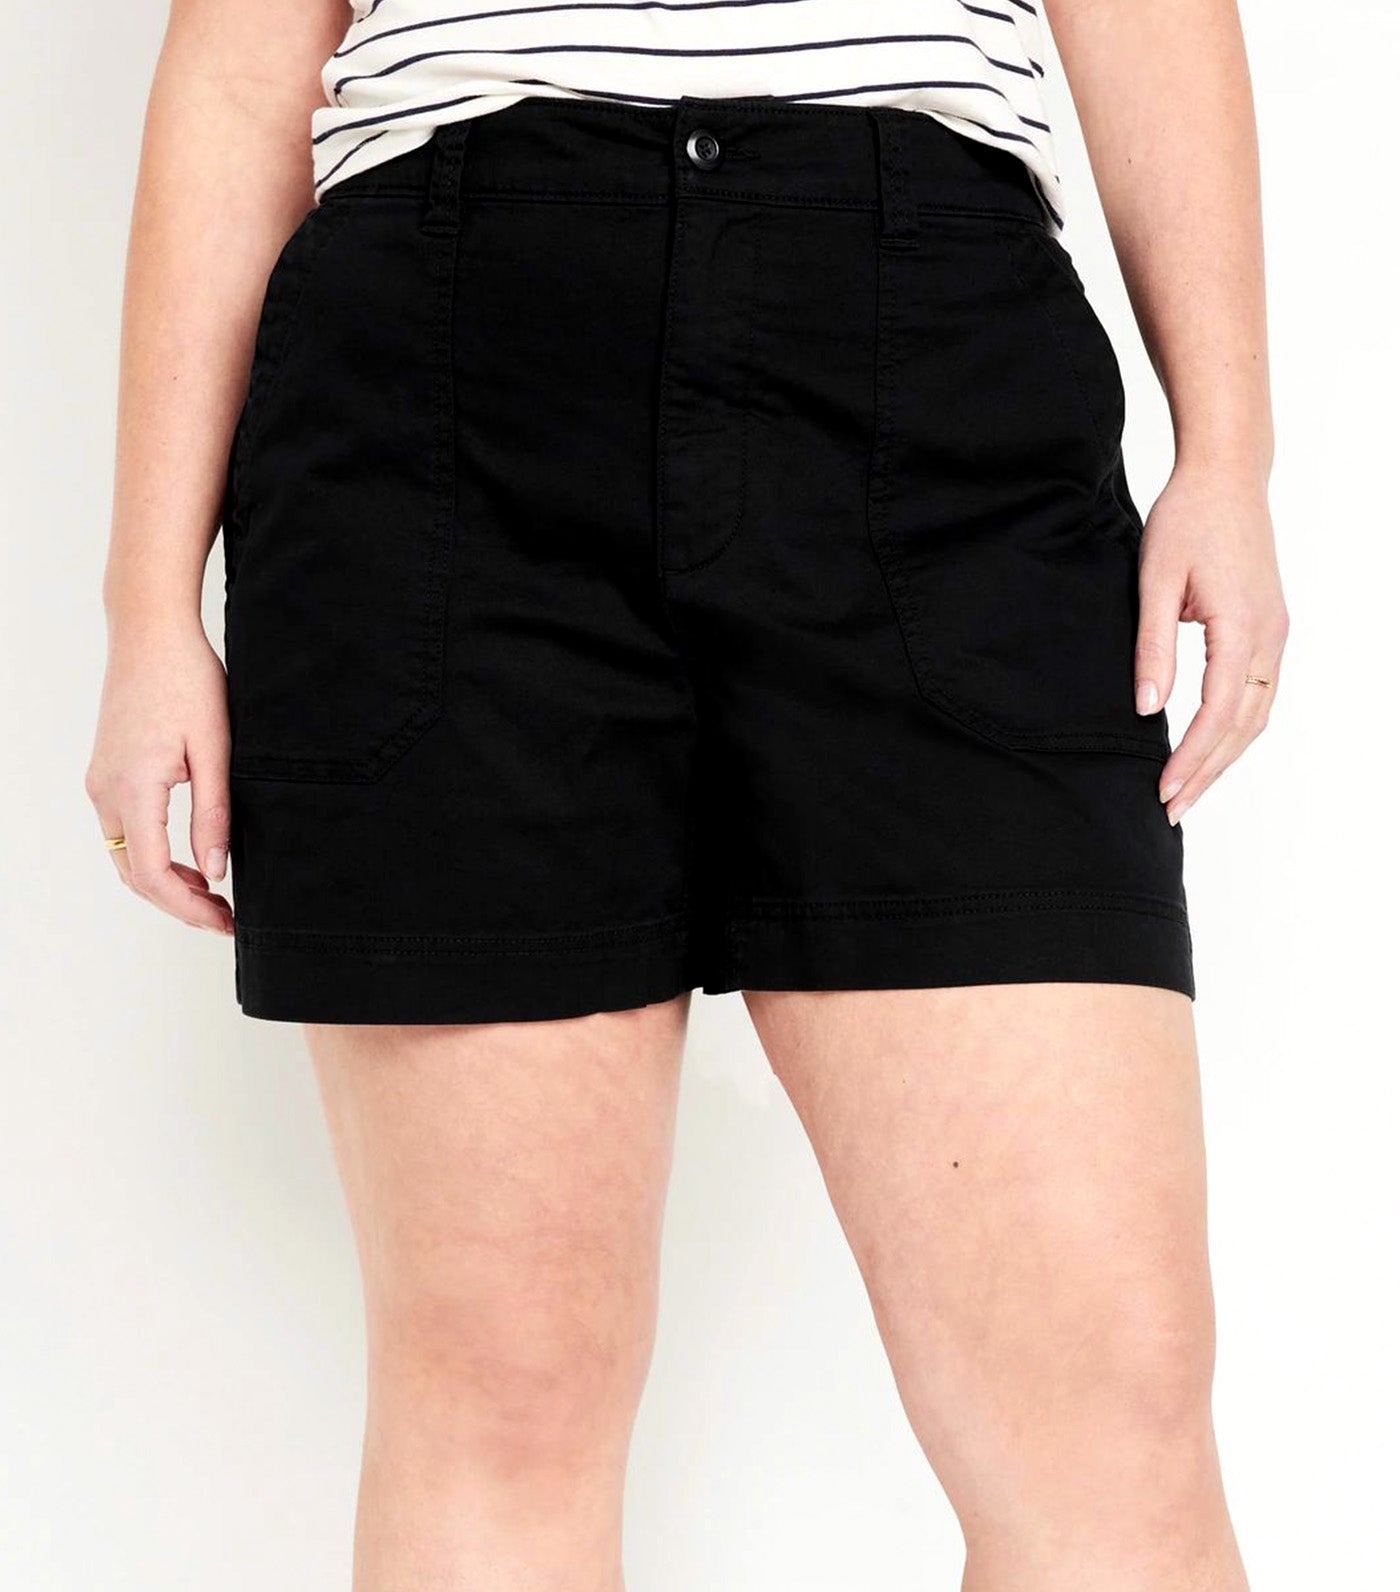 High-Waisted OGC Utility Chino Shorts for Women 5-Inch Inseam Black Jack